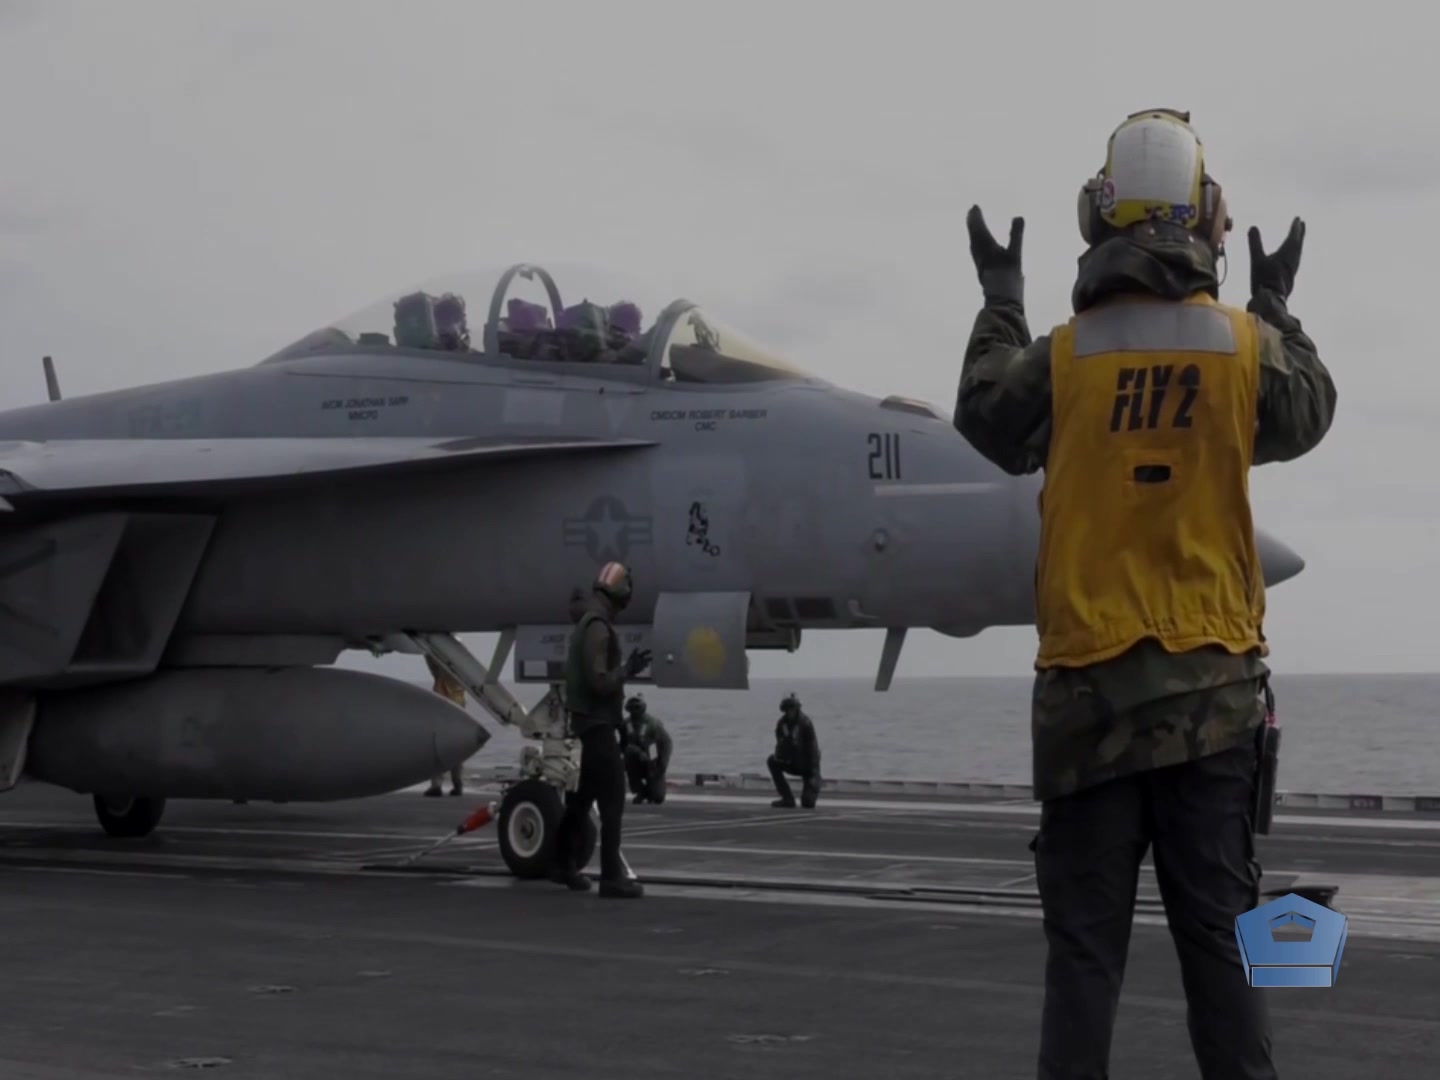 Flight deck operations on an aircraft carrier have often been compared to a ballet. Watch the choreography needed to launch and recover aircraft and supplies aboard the USS Harry S. Truman. The Truman can carry about 90 aircraft and has a 4.5-acre flight deck. Four elevators move aircraft between the flight deck and the hangar bay.